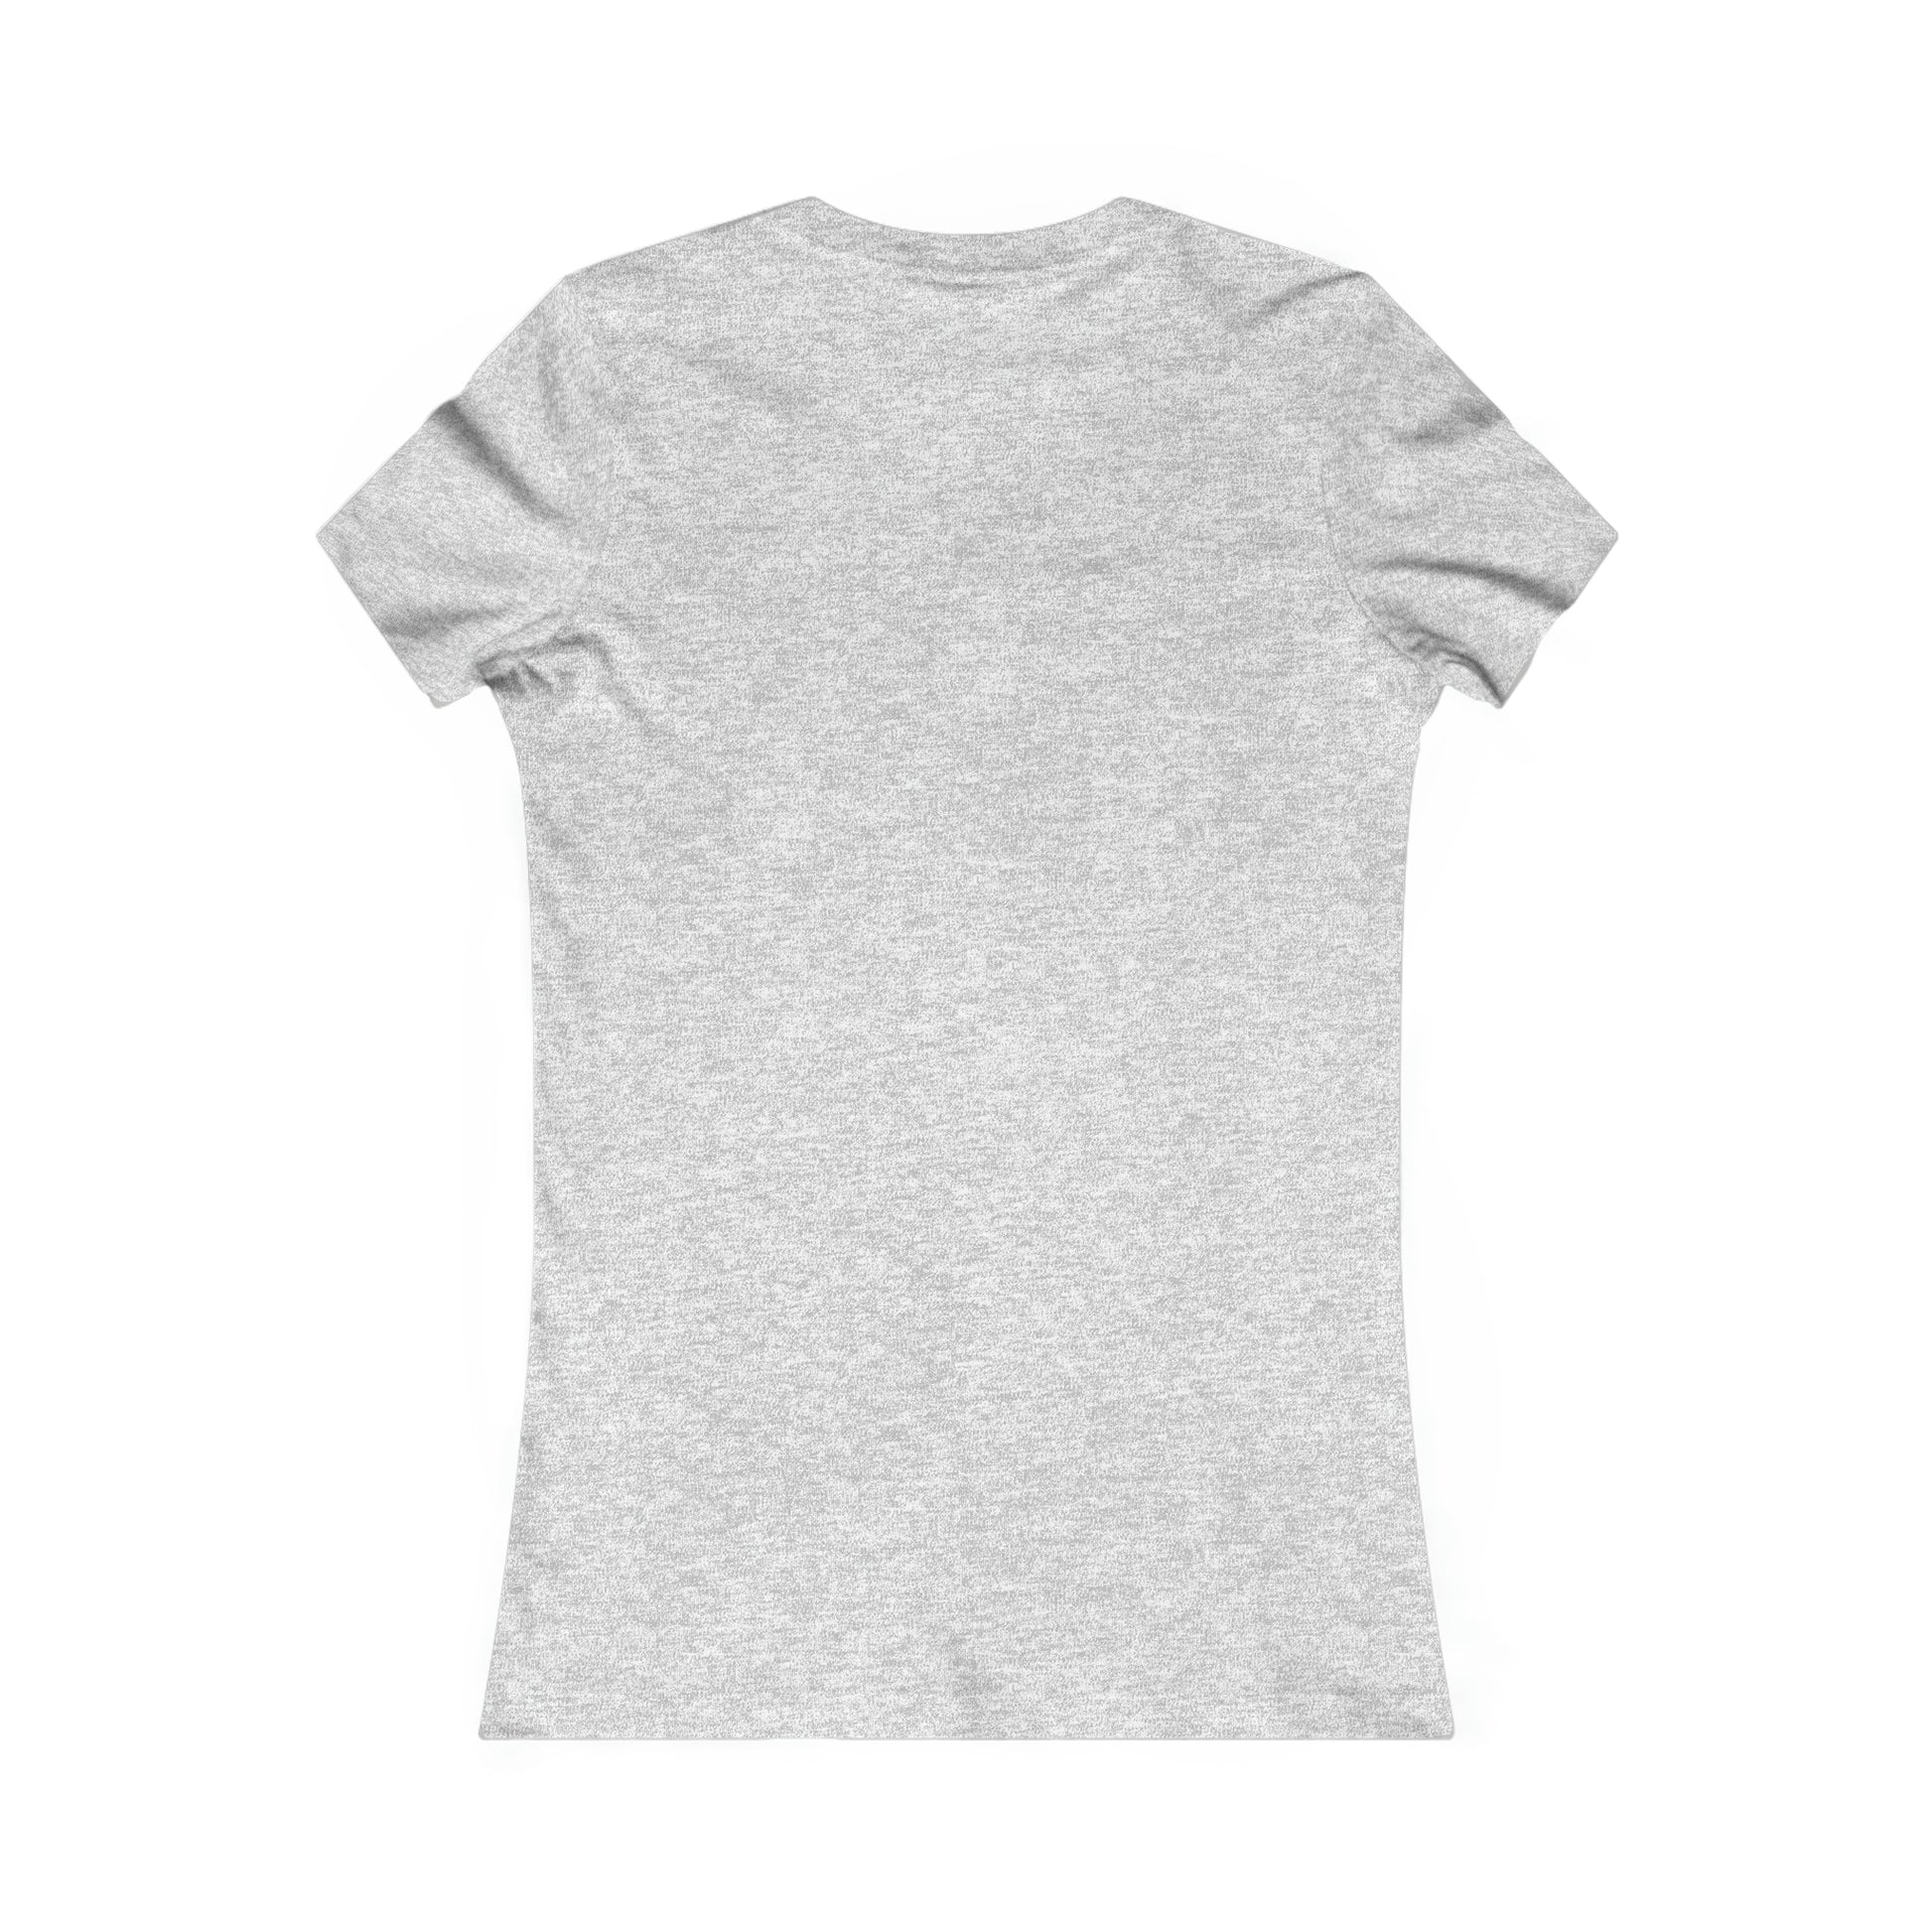 In My Boss Era - Women's High Quality Soft Blend Inspirational, EMPWRHER-Based Fashion Tee, ERA Collection, Women's Favorite Tees Printify